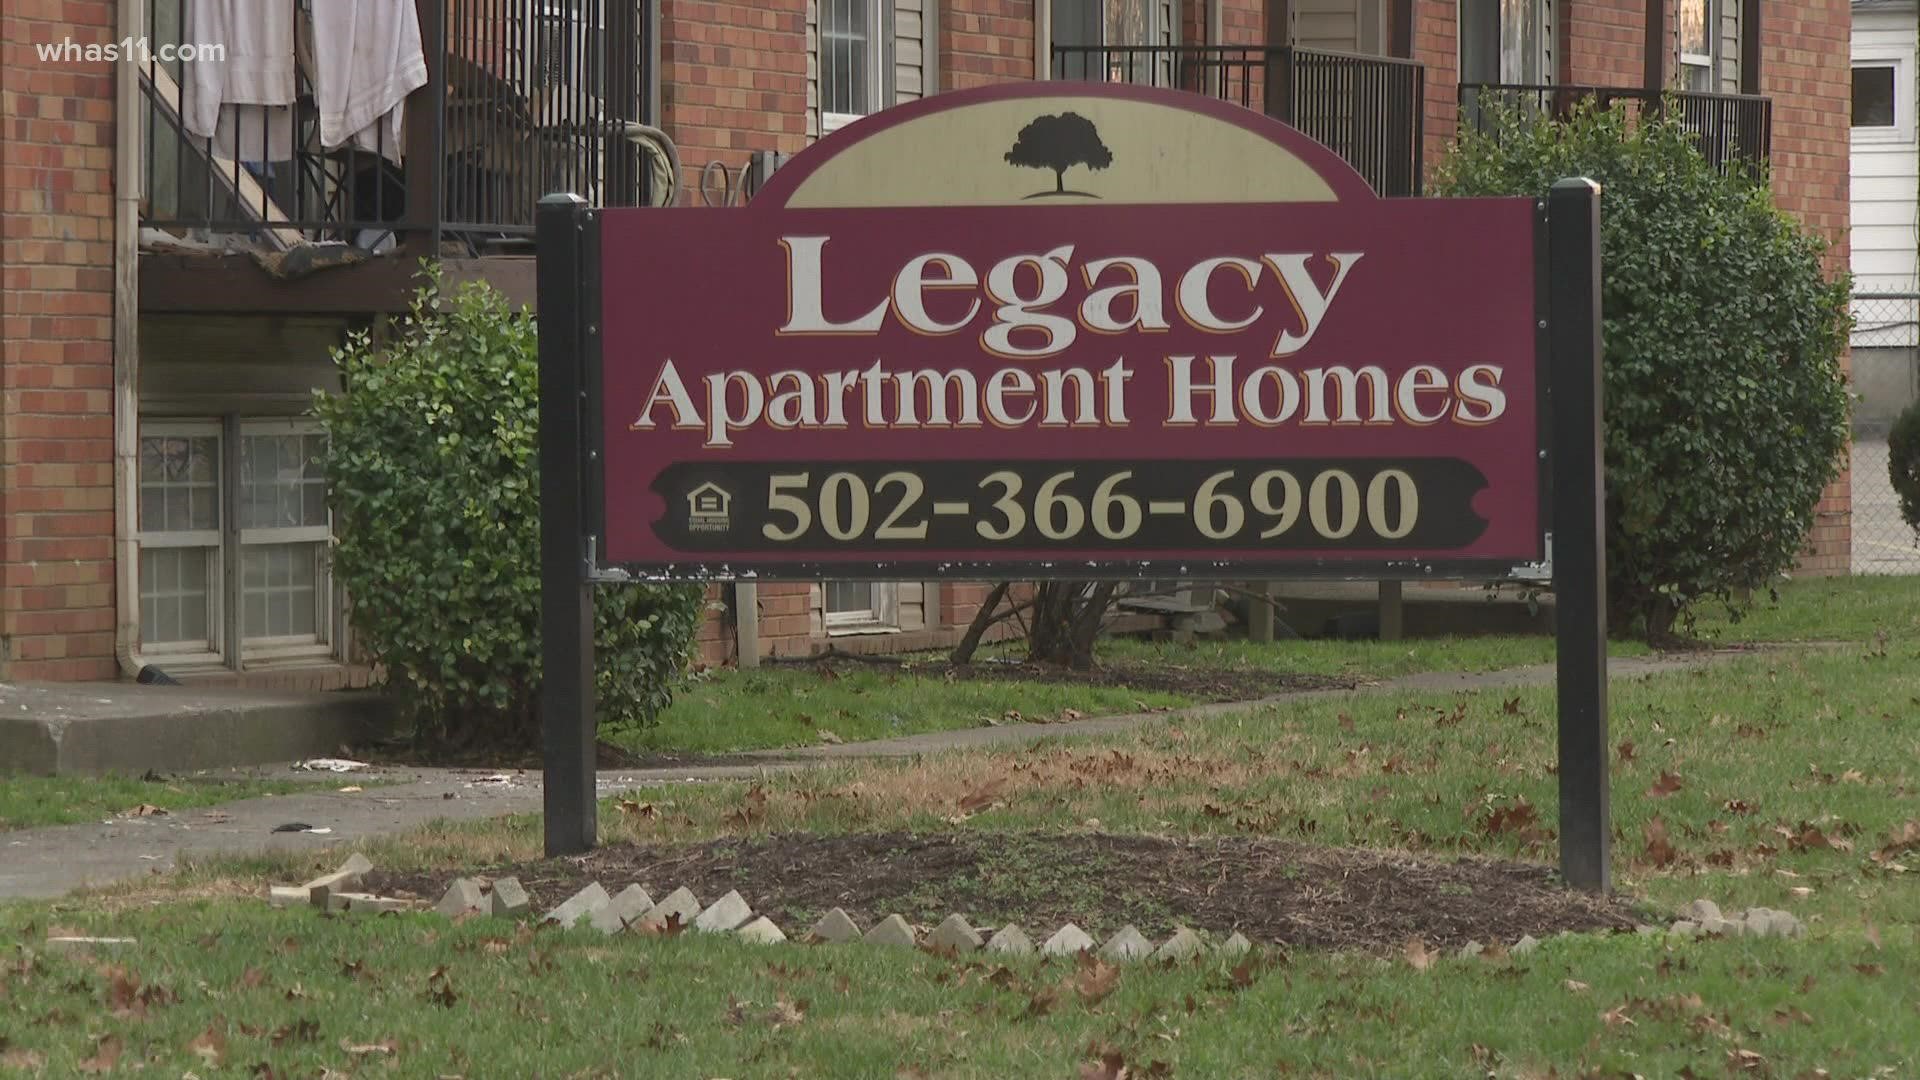 Residents said new management at the Legacy Apartments in Auburndale is choosing not to renew the leases of dozens of tenants right before Christmas.